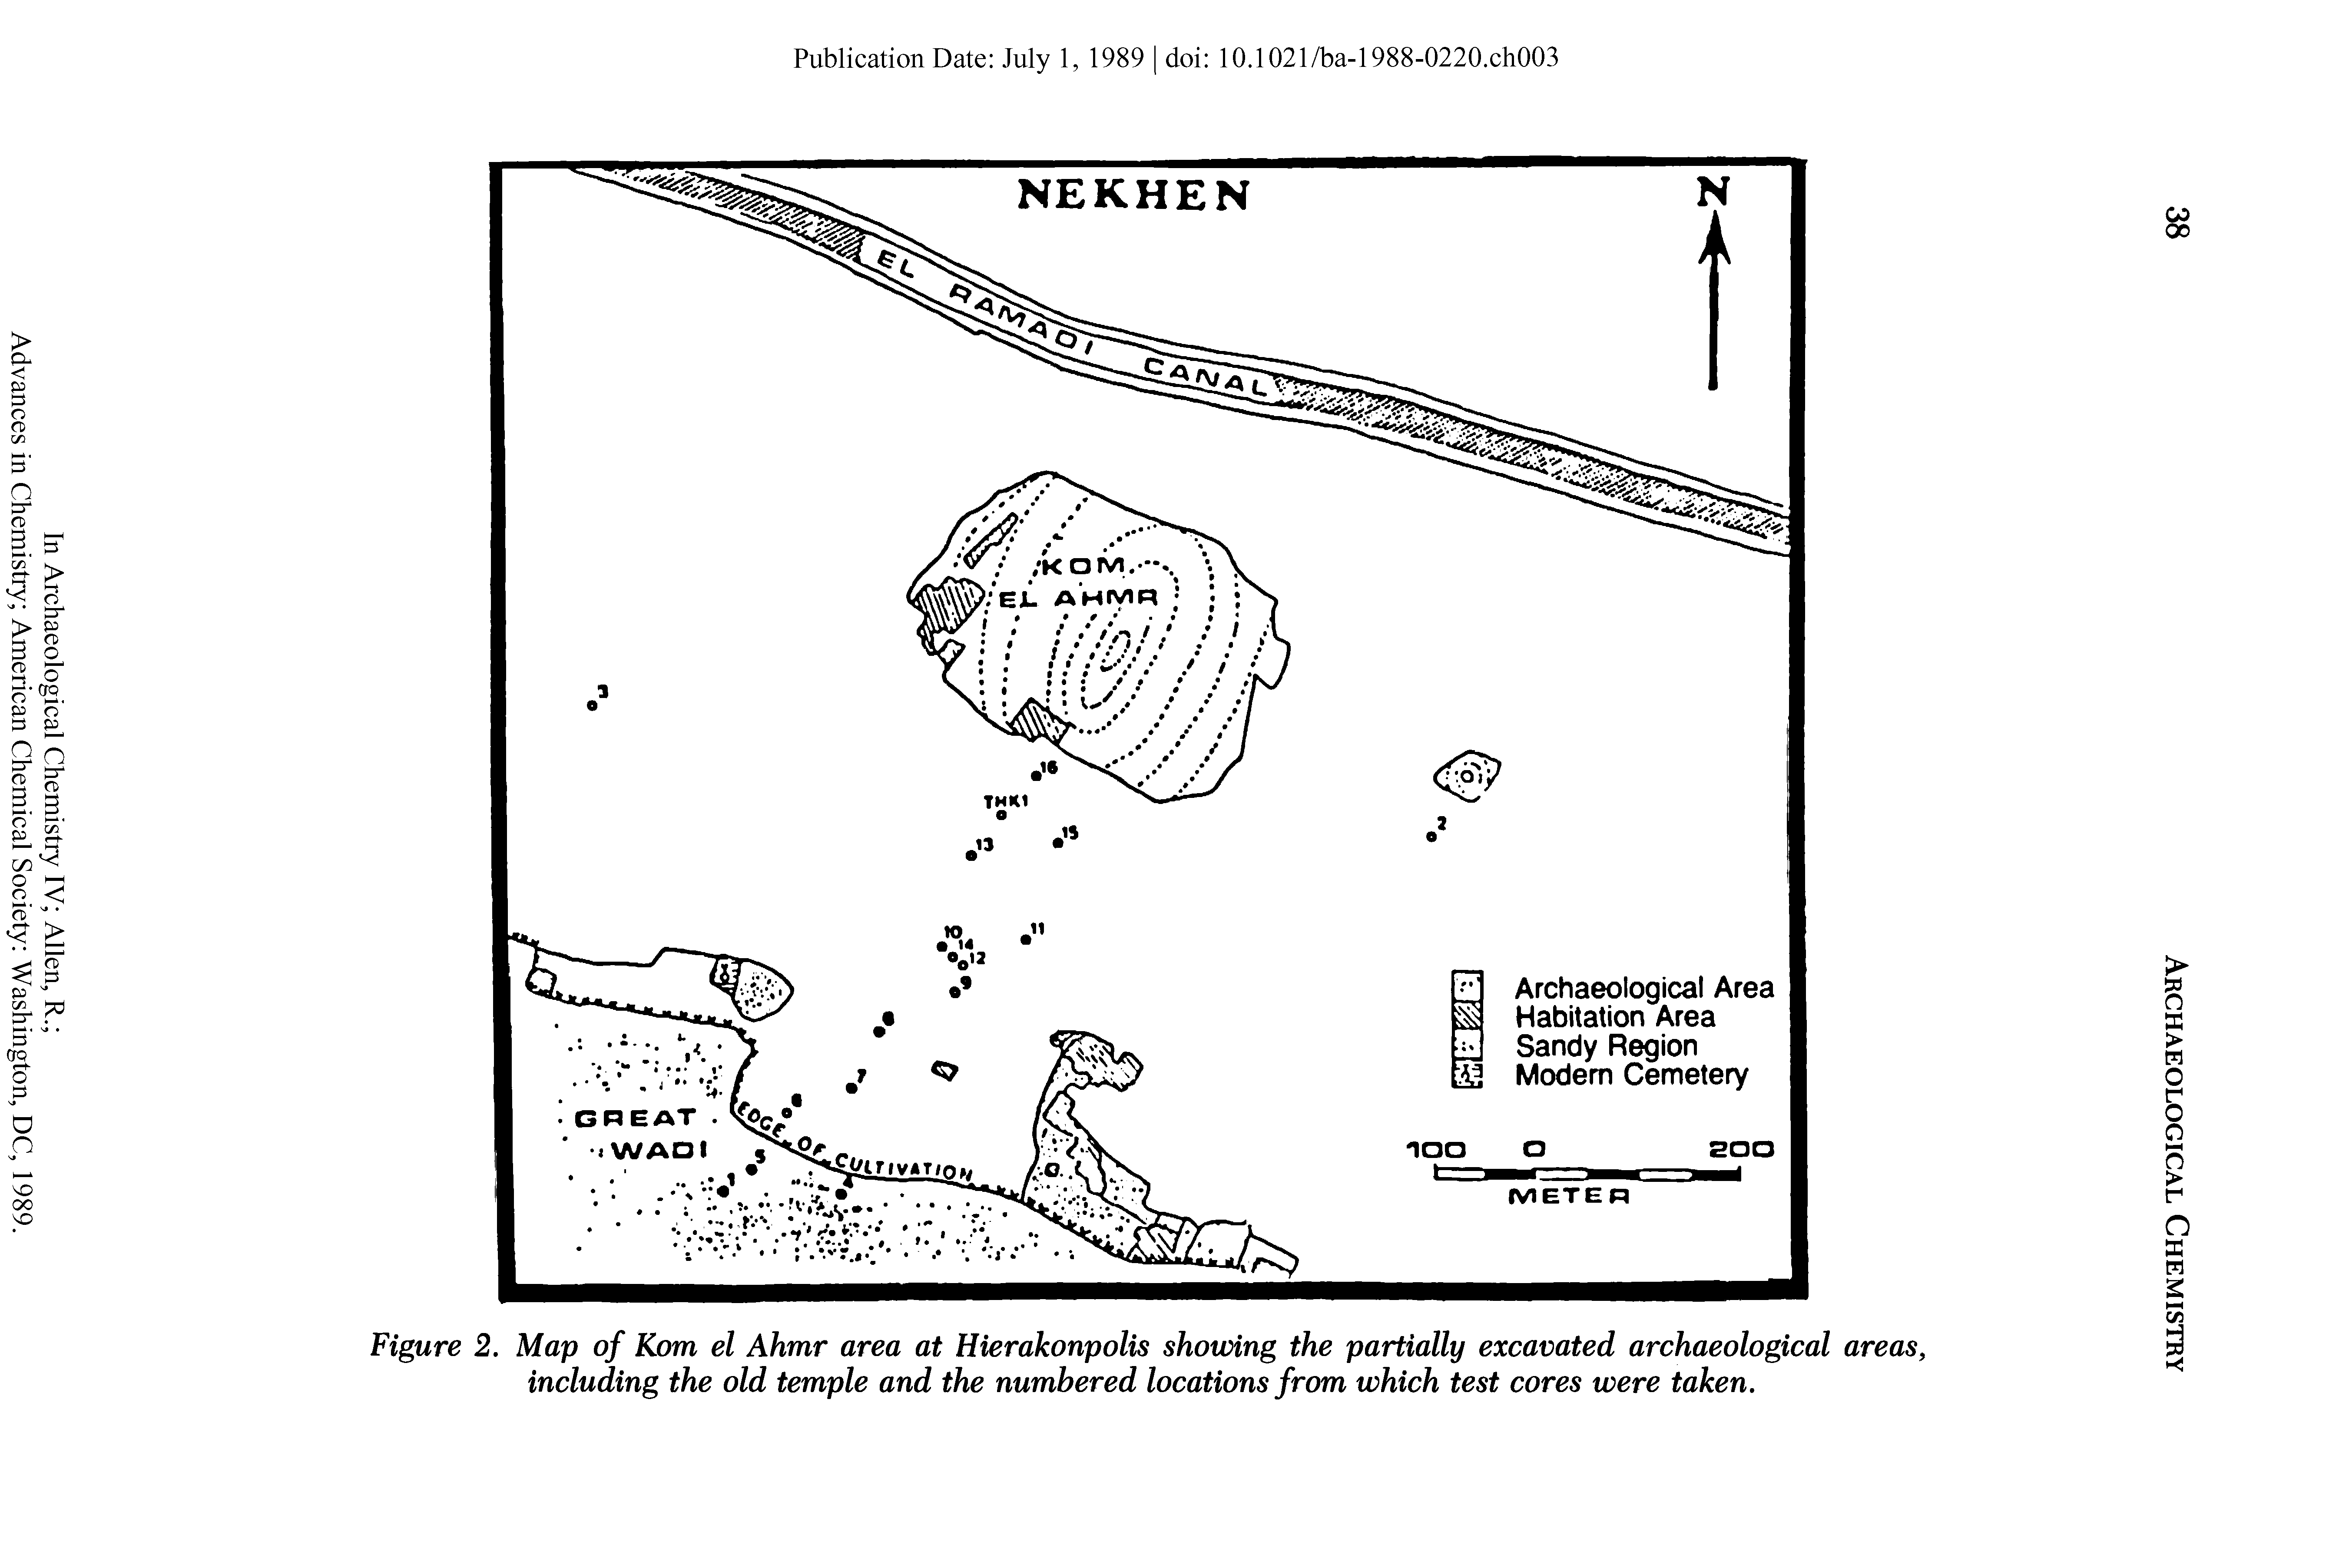 Figure 2. Map of Kom el Ahmr area at Hierakonpolis showing the partially excavated archaeological areas, including the old temple and the numbered locations from which test cores were taken.